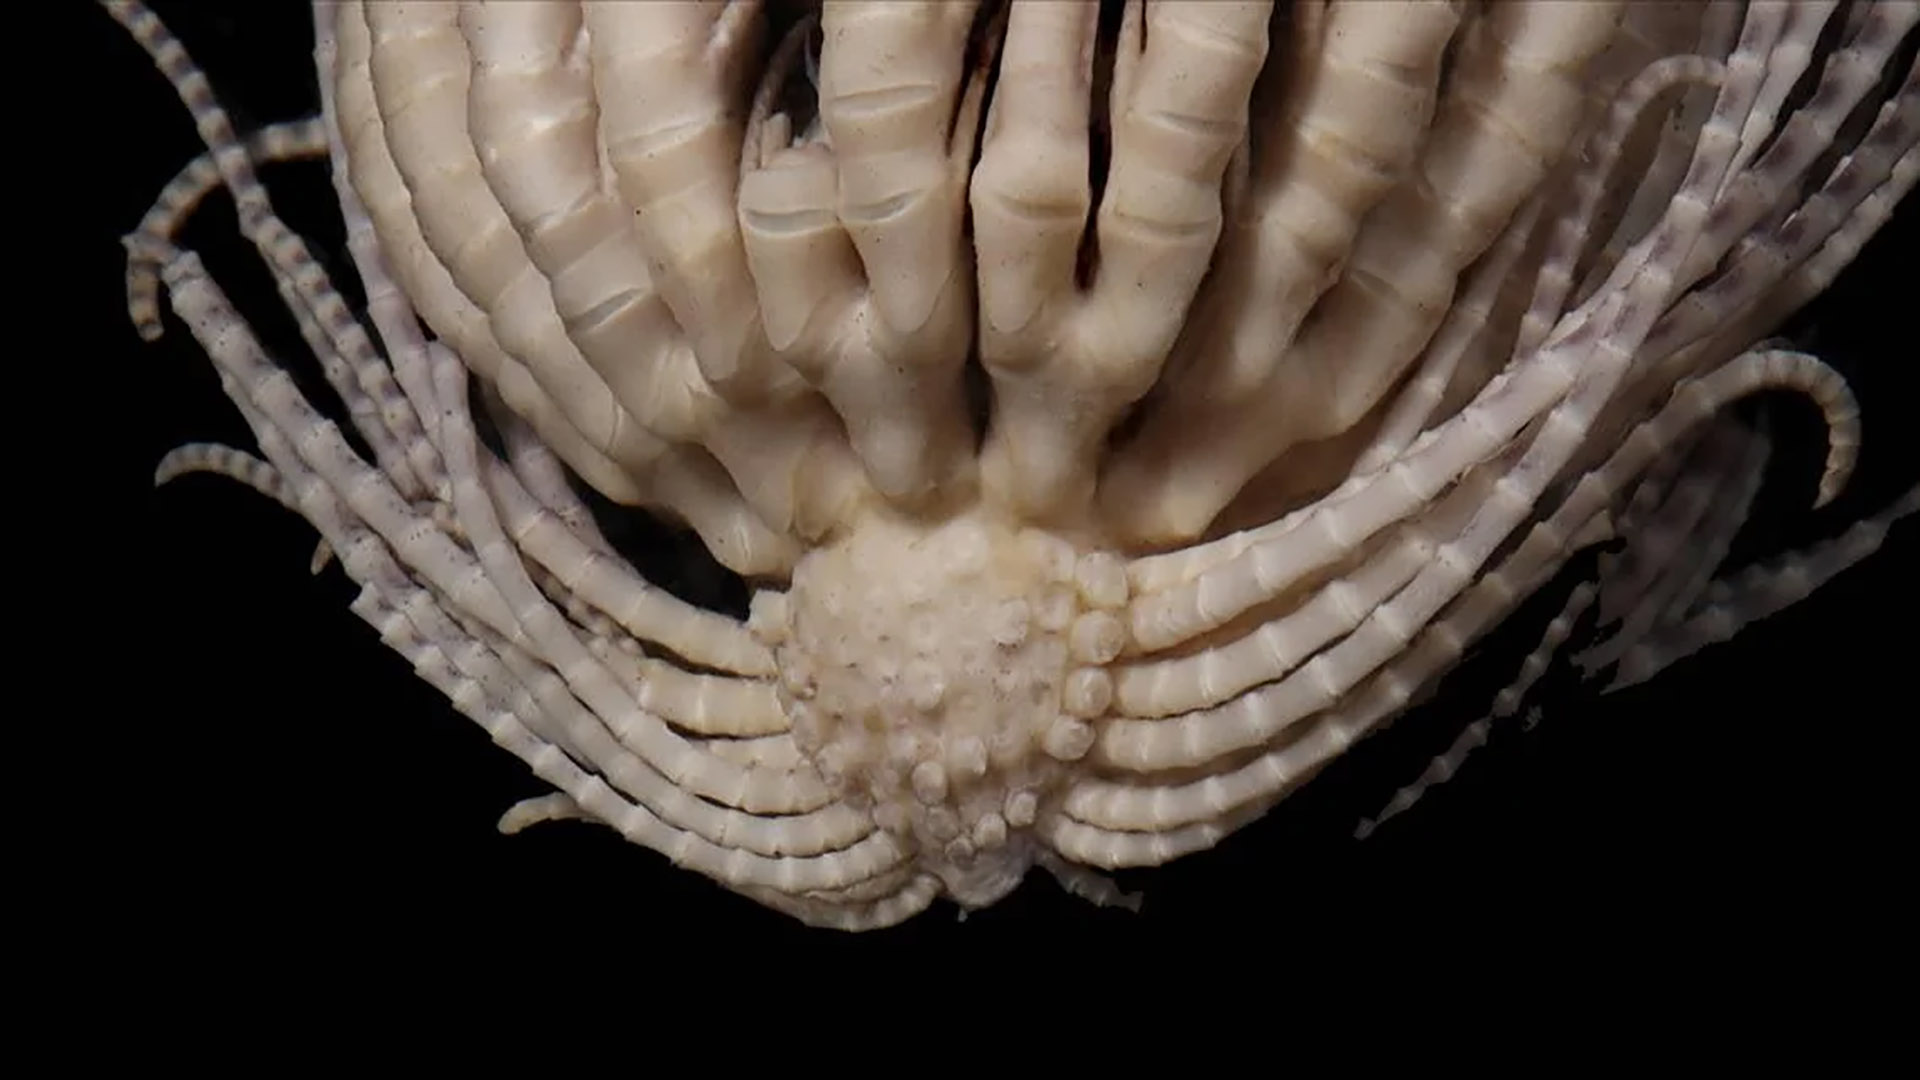 Marine scientists discovered a terrifying new sea creature with 20 arms